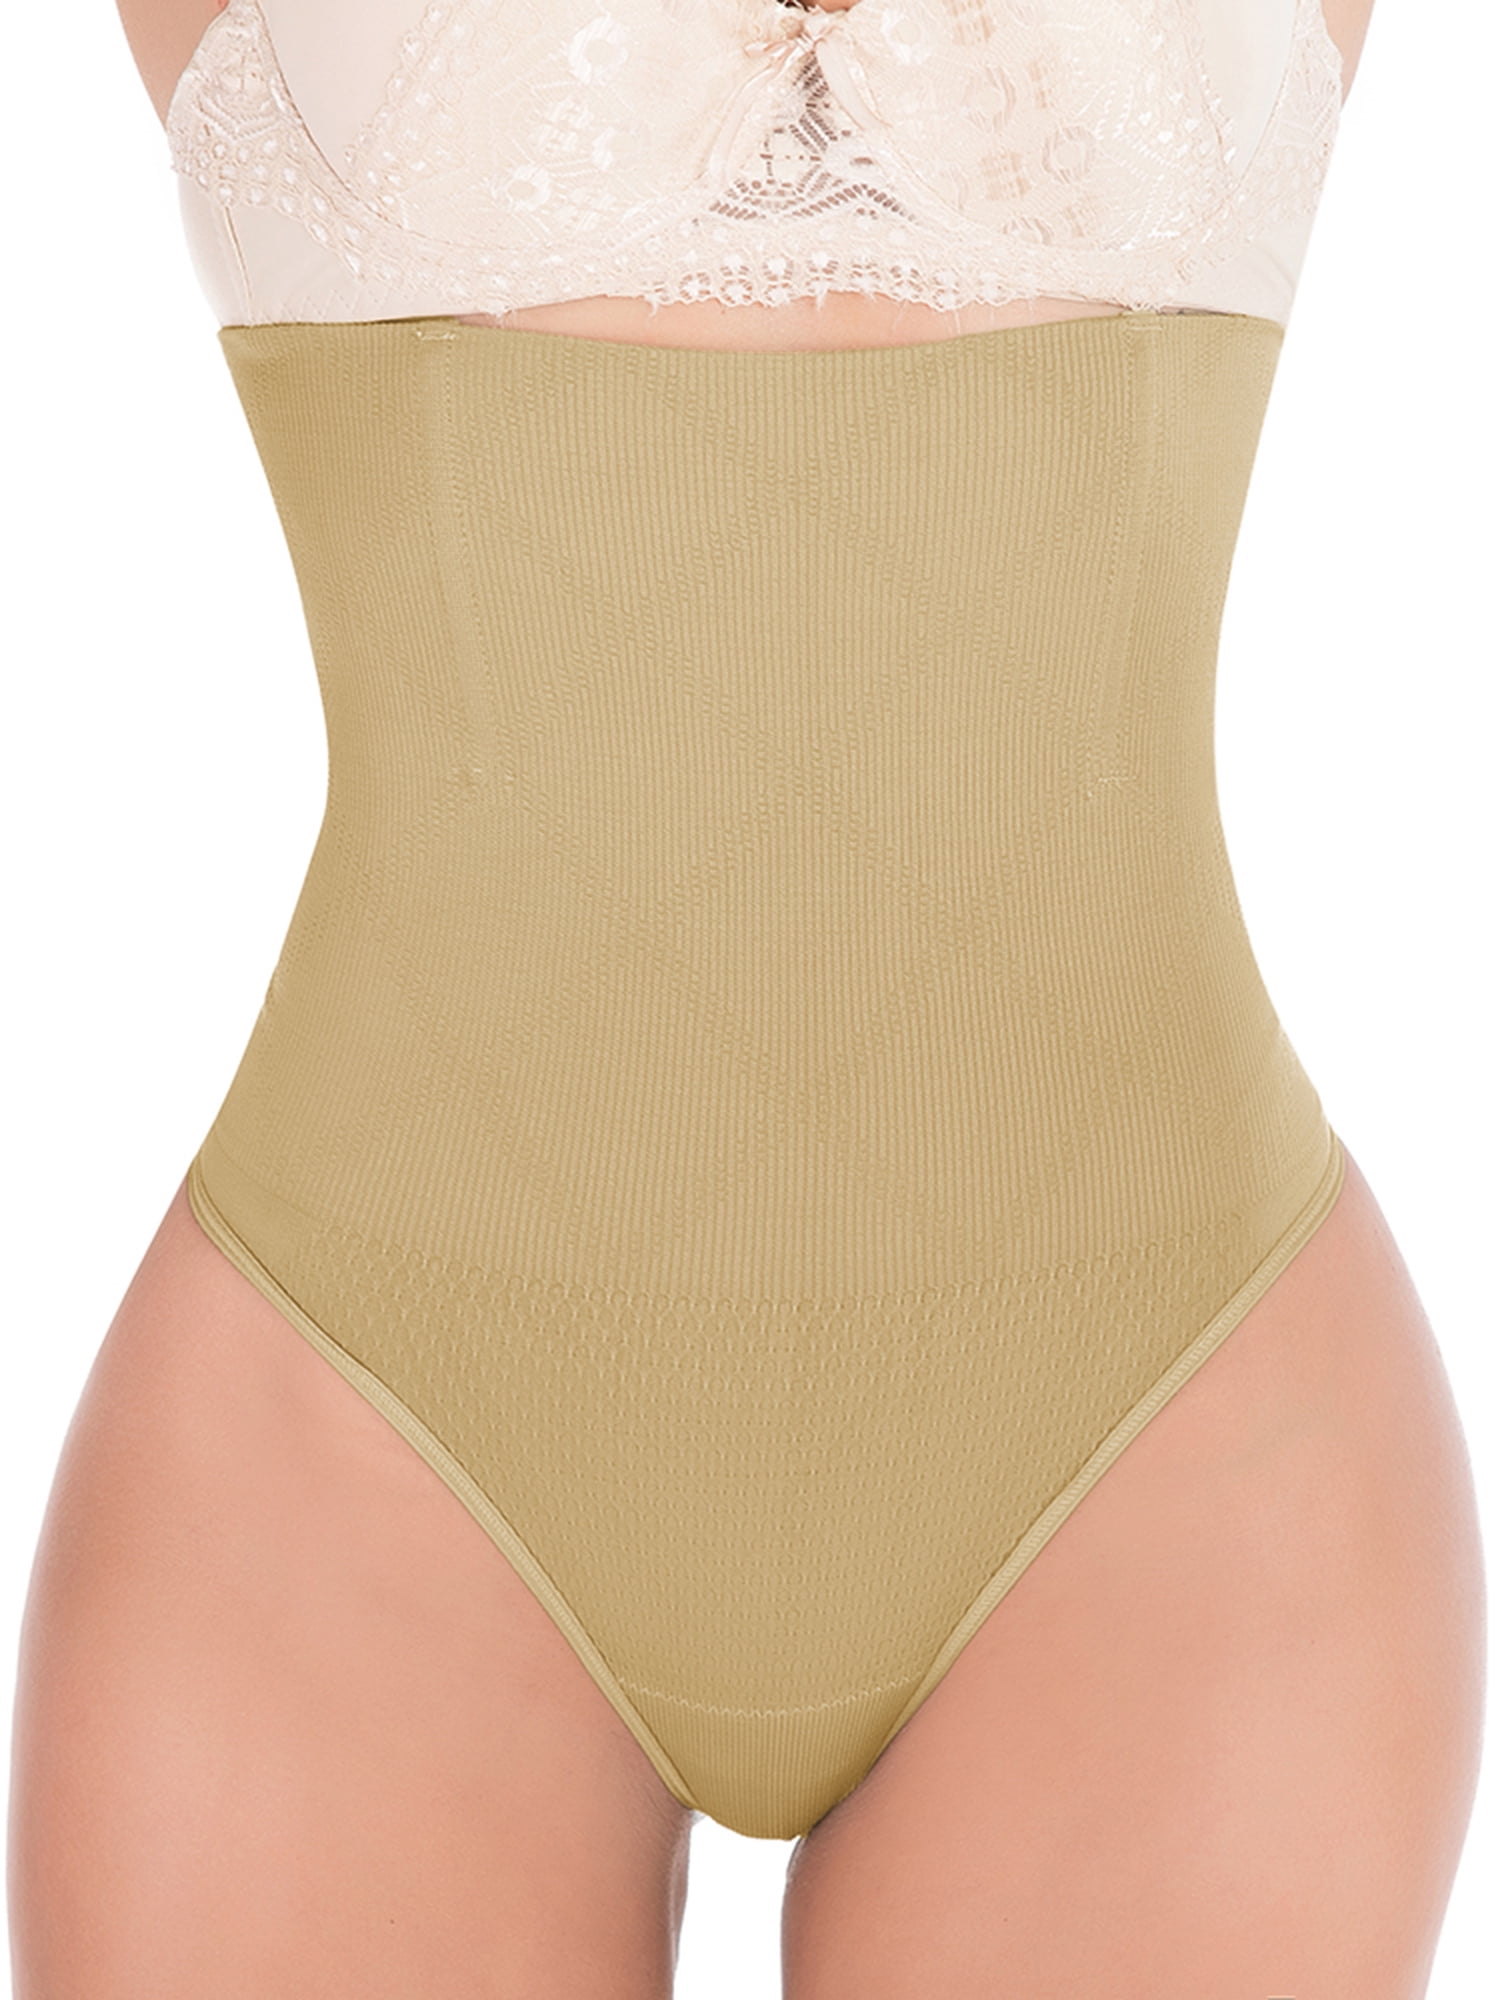  Wide Gusset Thongs For Women, Tummy Control Thong-Peachy  Shapewear Seamless Women Day Of The Week Women's High Waist Cotton Sexy  Sports Pull In Your Belly And Panties No (XS, Hot Pink) 